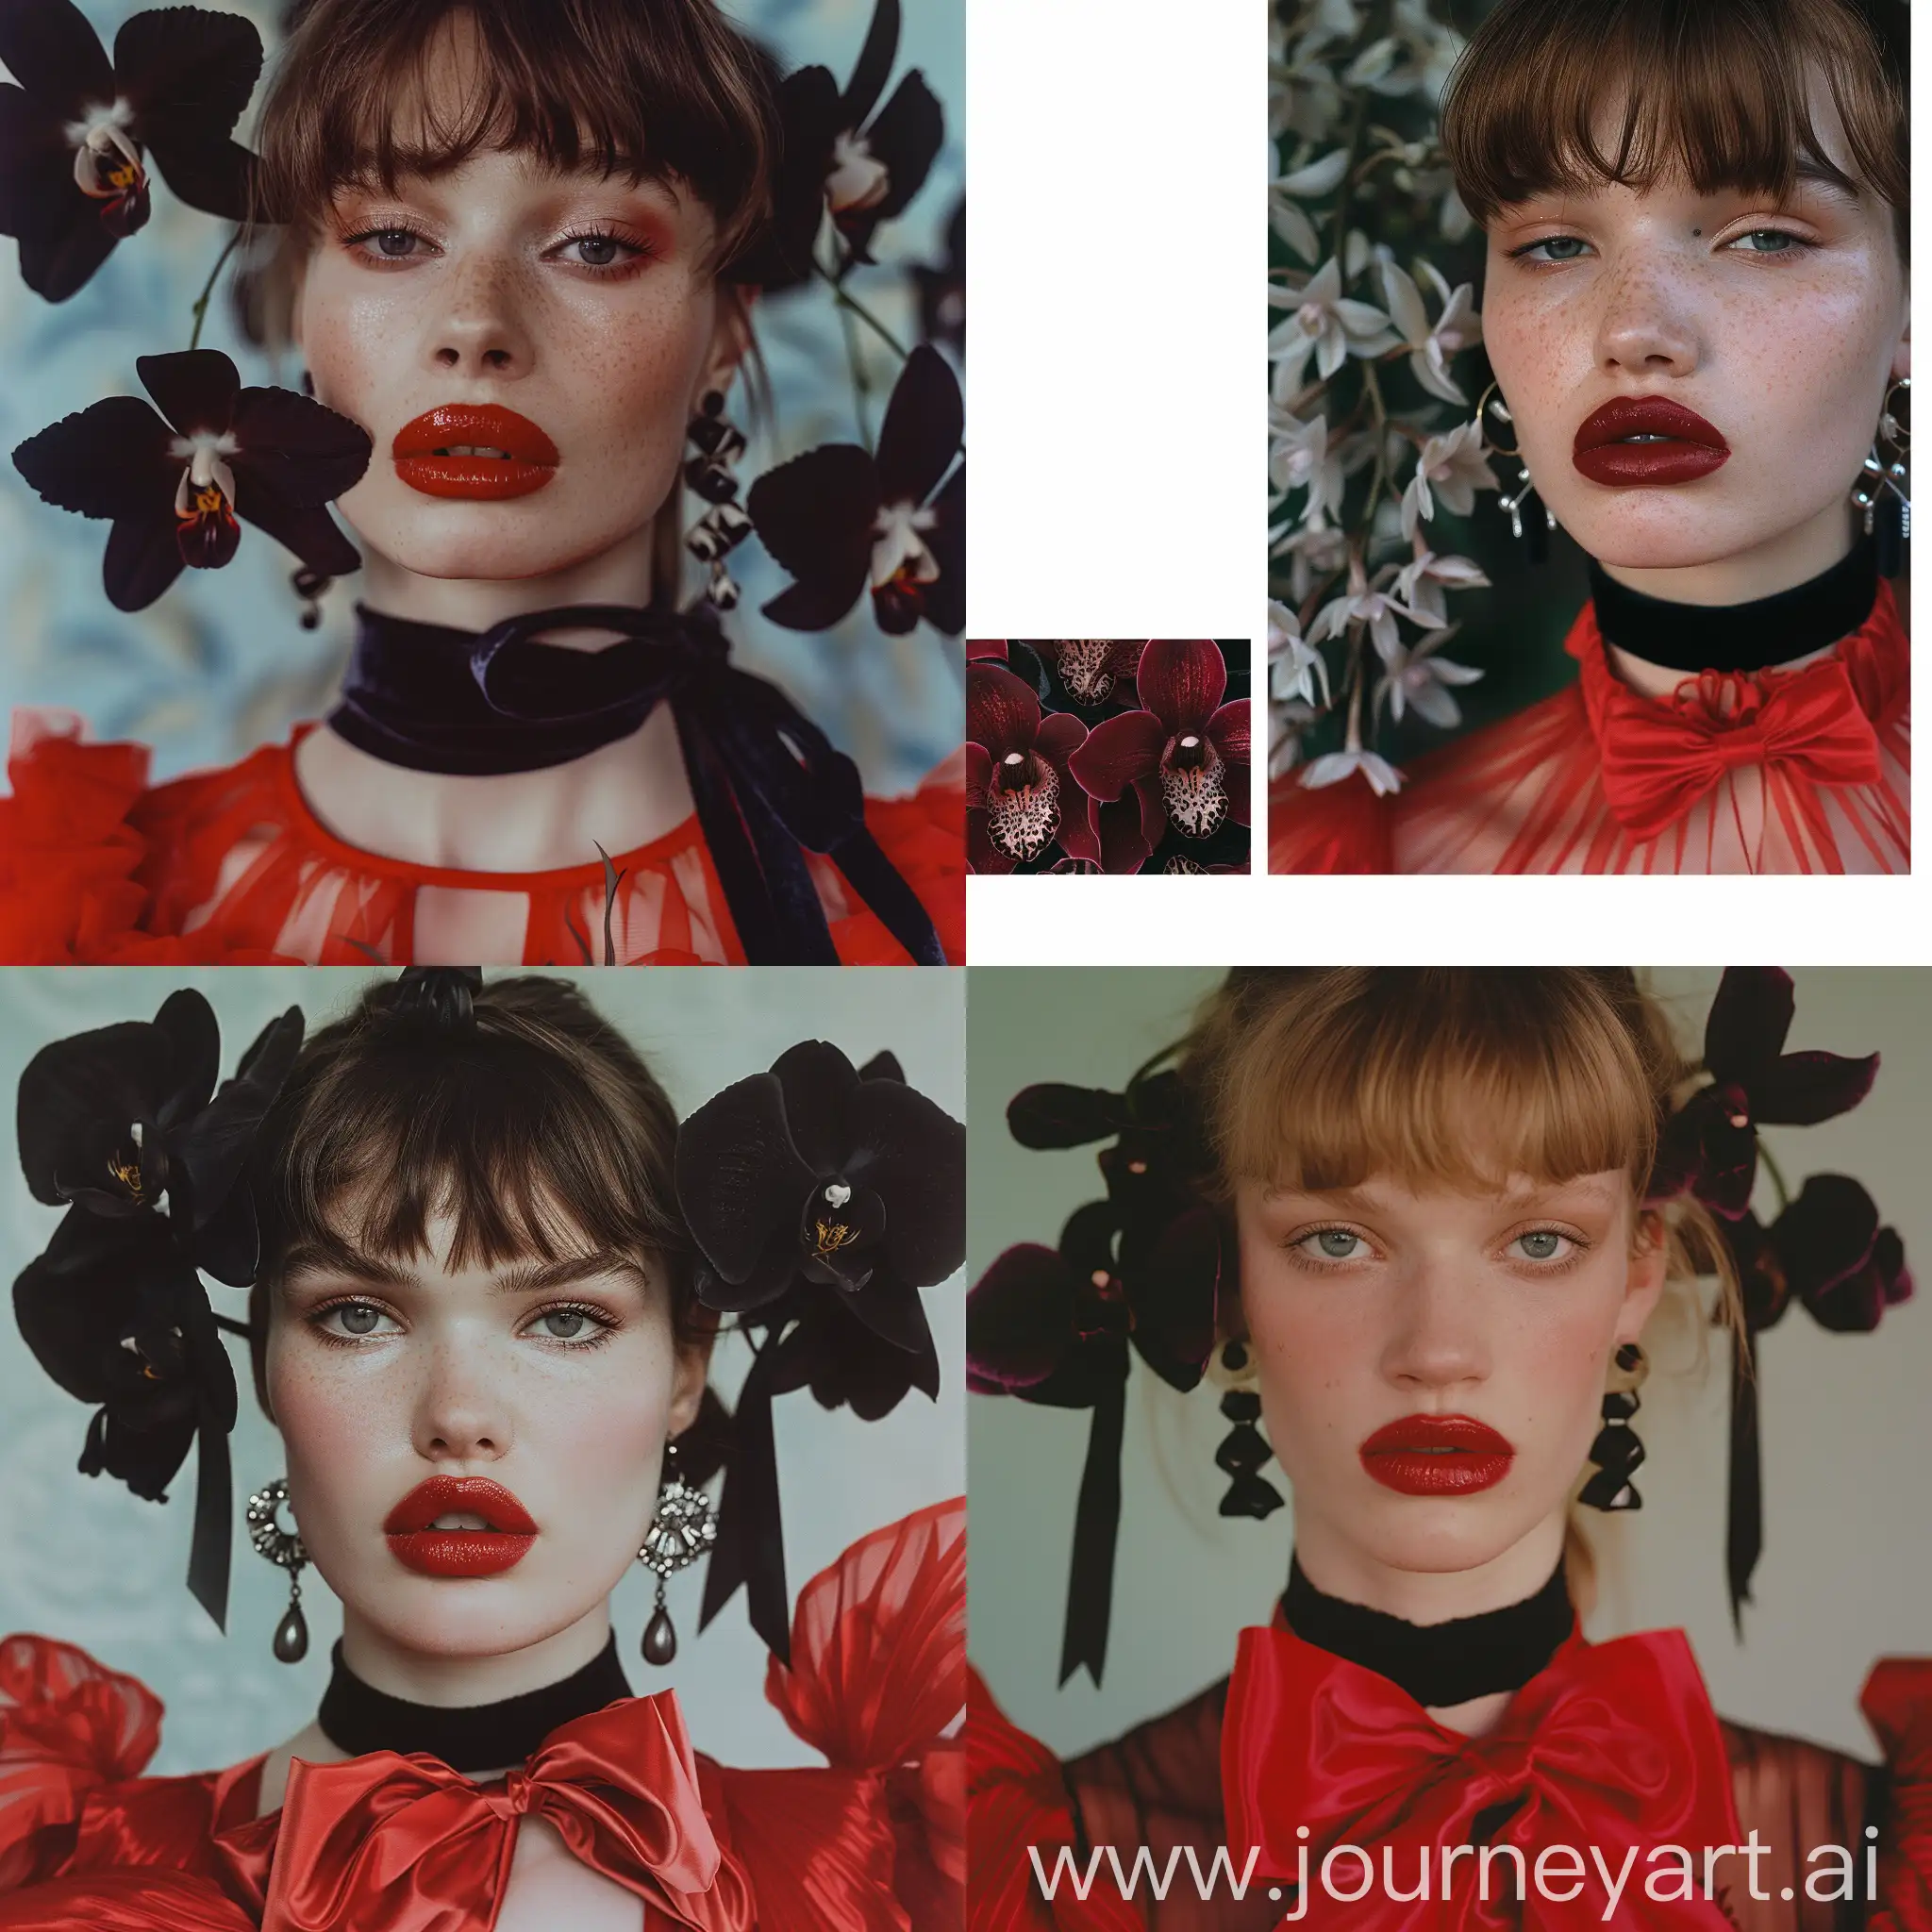 90s-Young-Model-in-Black-Orchids-Collage-Portrait